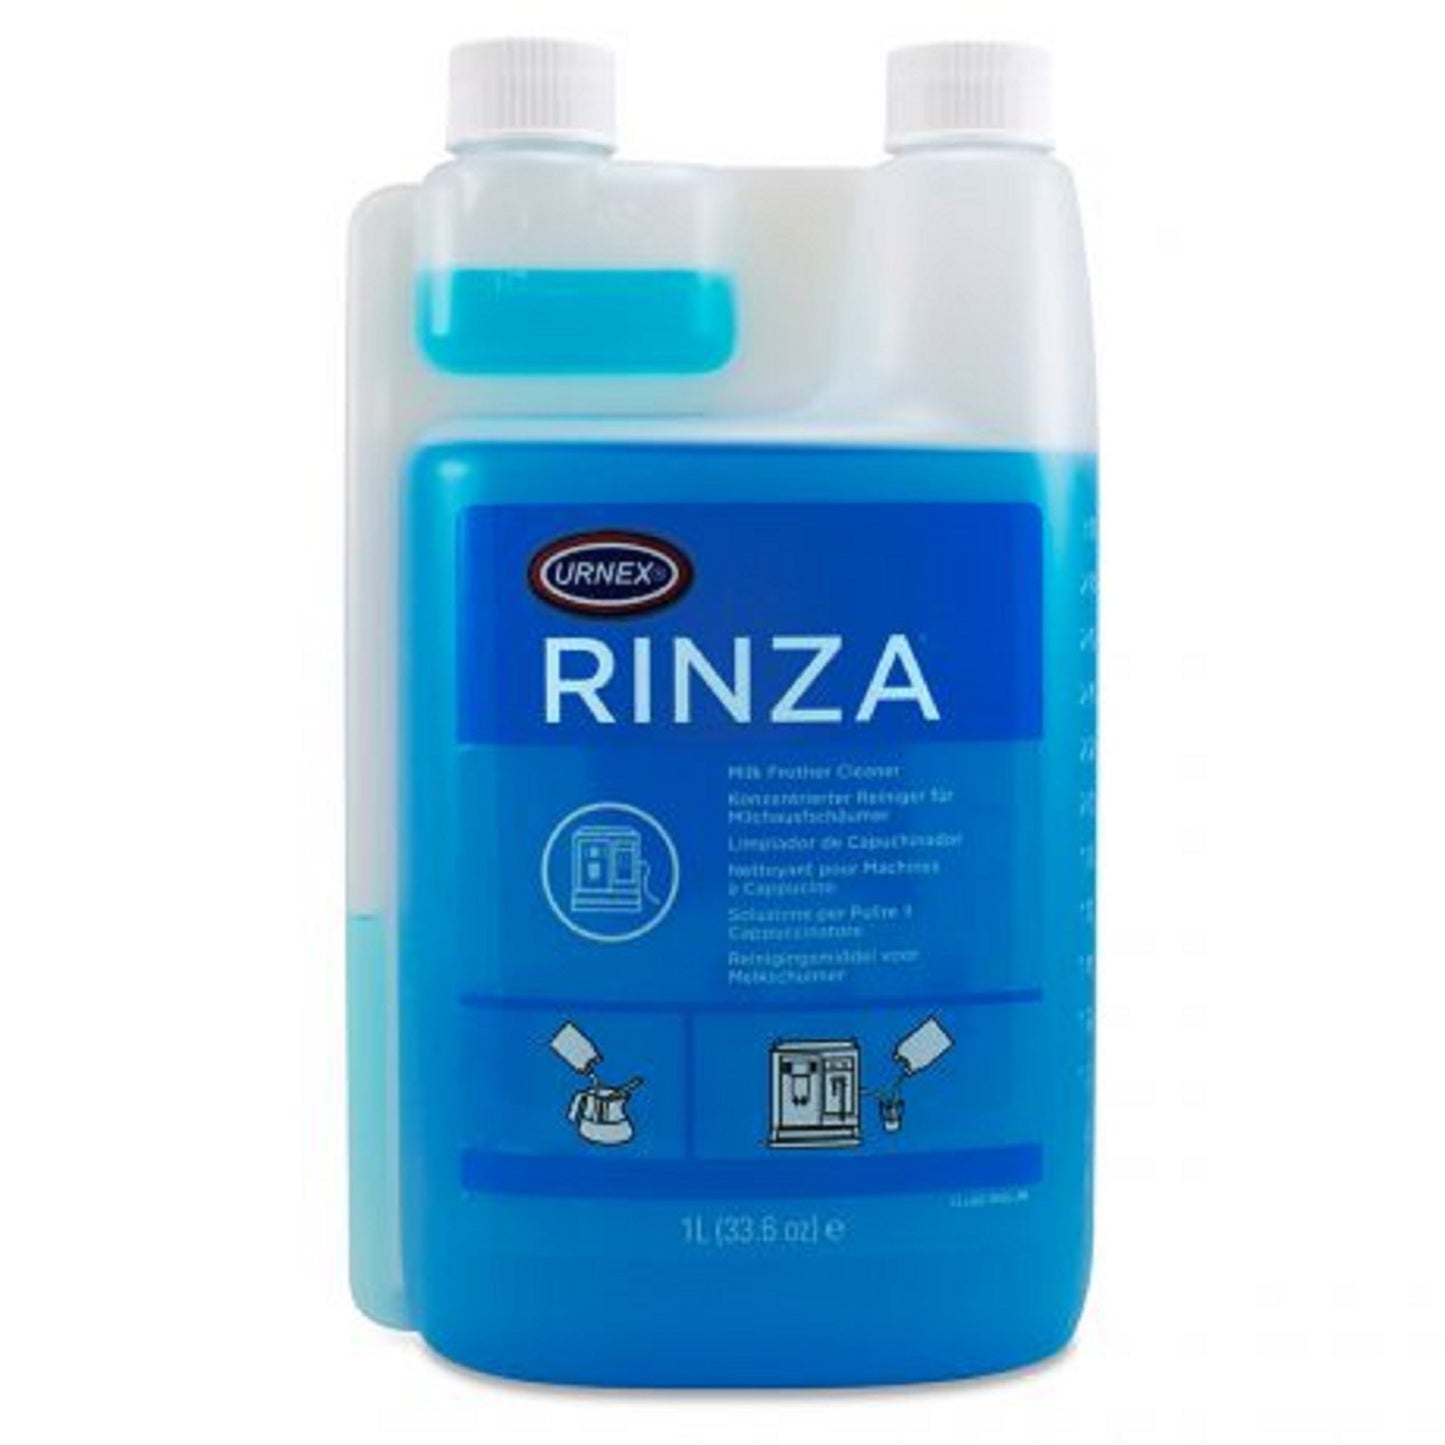 Urnex - Rinza Milk Frother Cleaner 1.1L - Velo Coffee Roasters